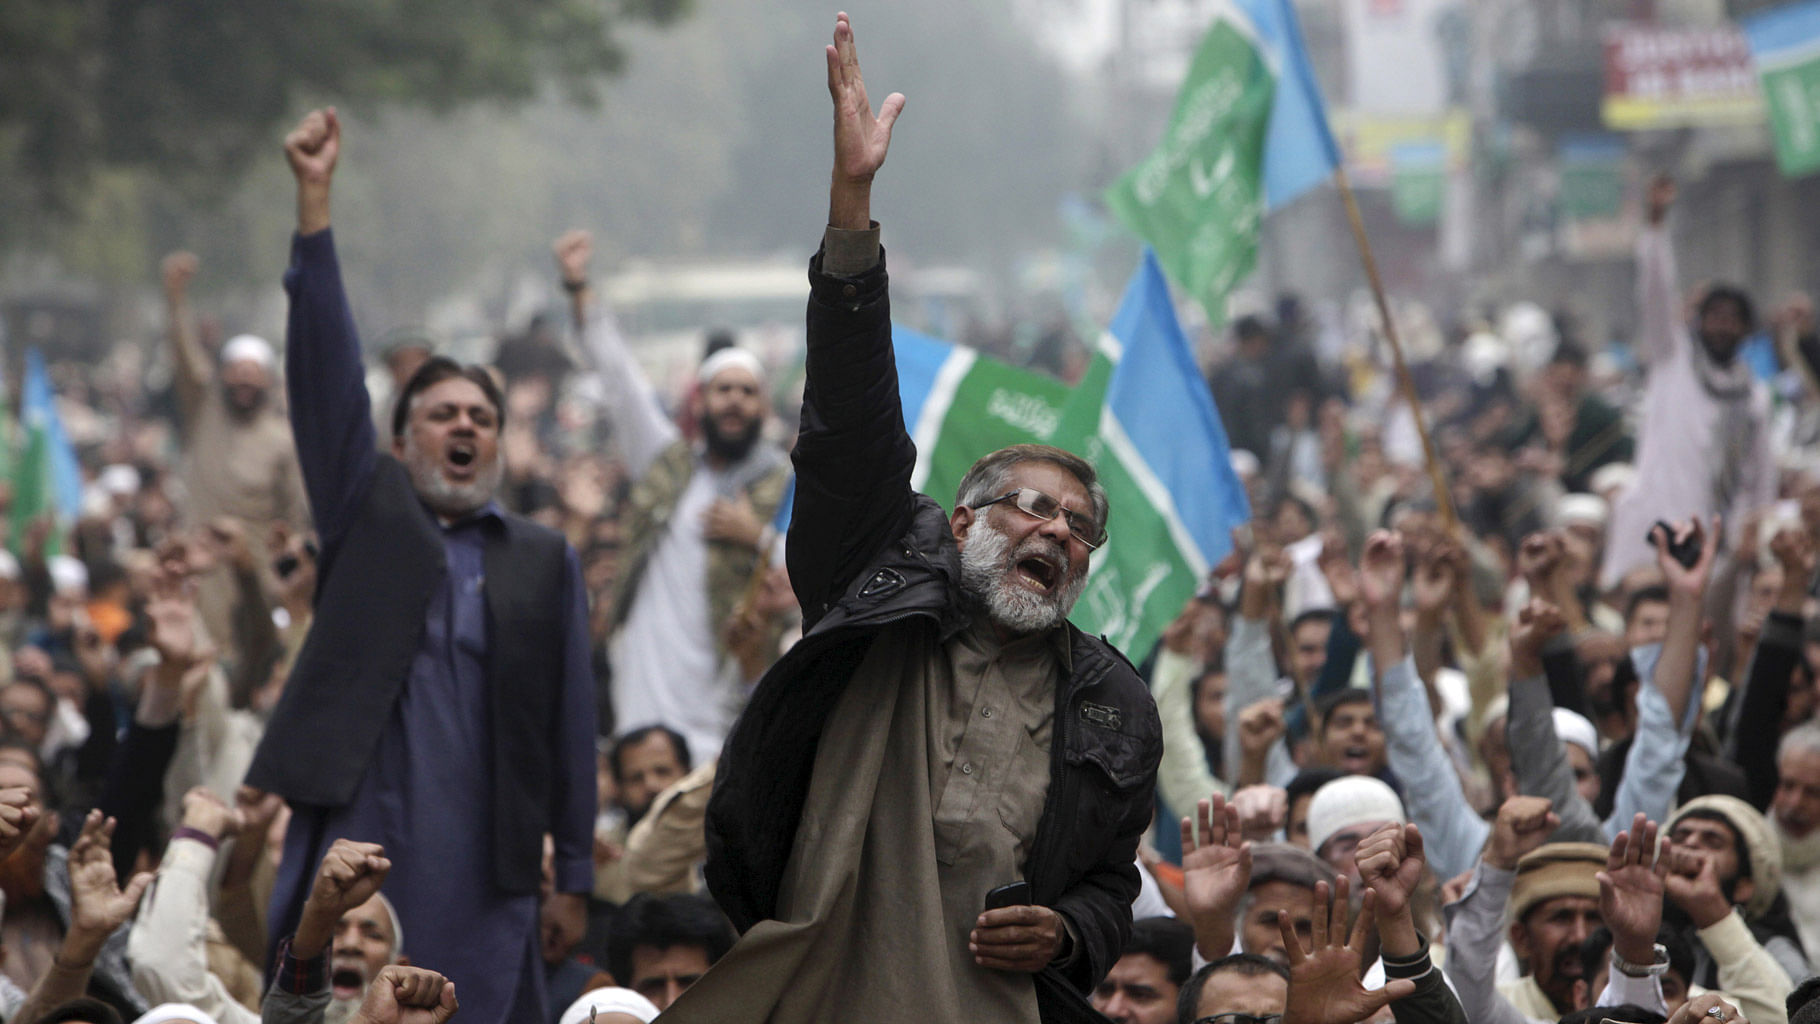 Supporters of Jamaat-e-Islami, a Pakistani religion-based political party, shout slogans as they protest the Bangladesh government’s execution of its leaders, in Lahore, Pakistan, 29 November  2015. (Photo: Reuters)